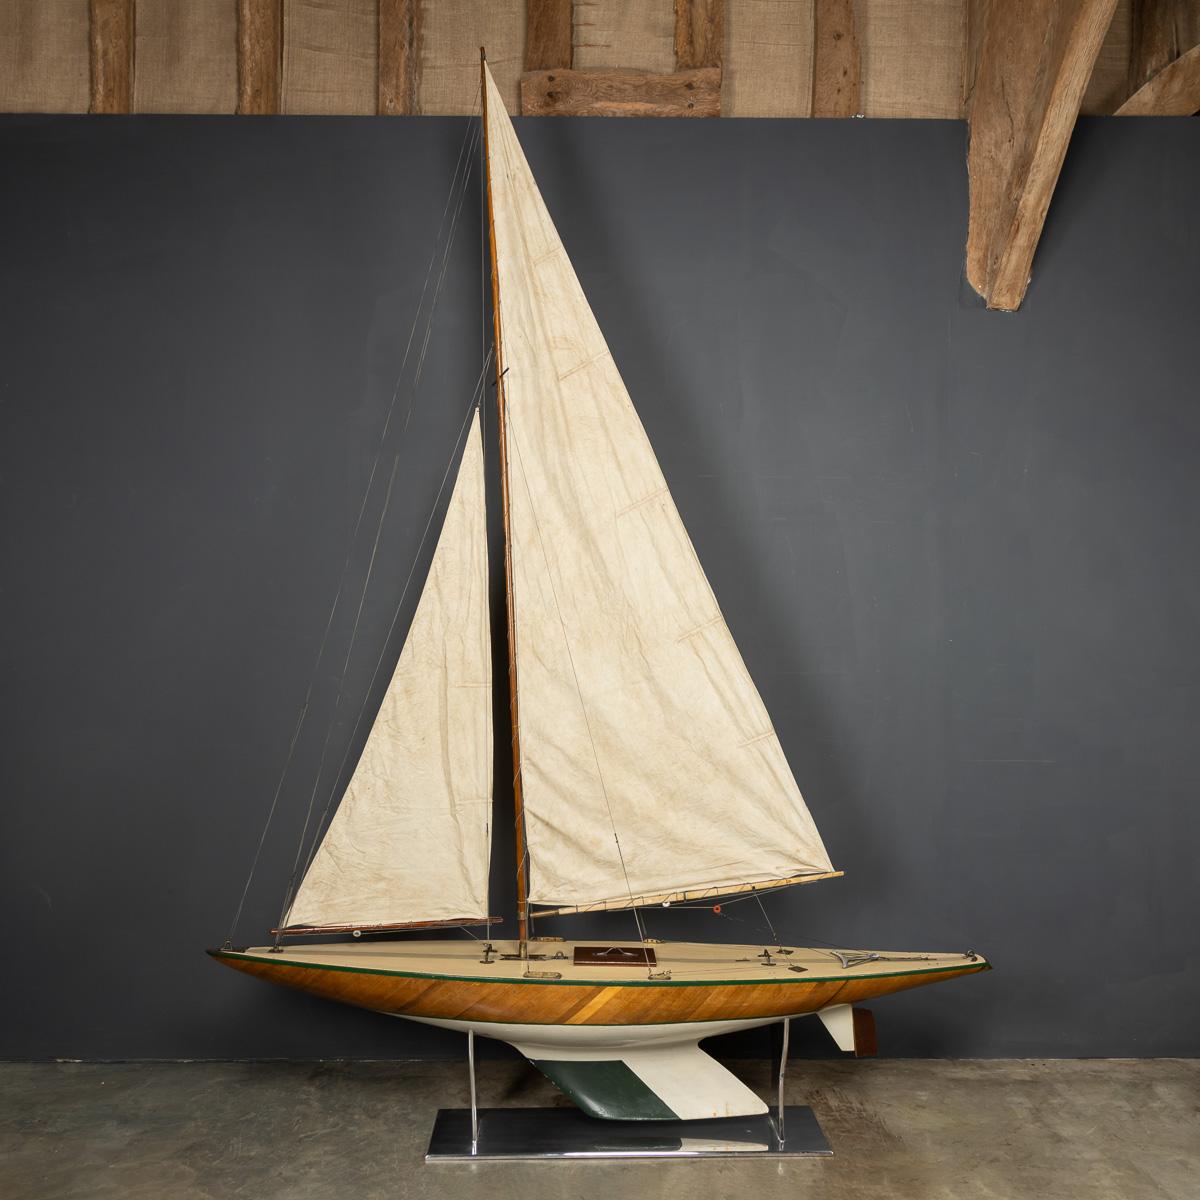 Mid-20th Century bermudan sloop pond yacht, with a lovely carved two tone hull. The yacht is a great example of British pond racing yacht and would have raced against similar yachts in competitions, club against club, all over Britain, sometimes